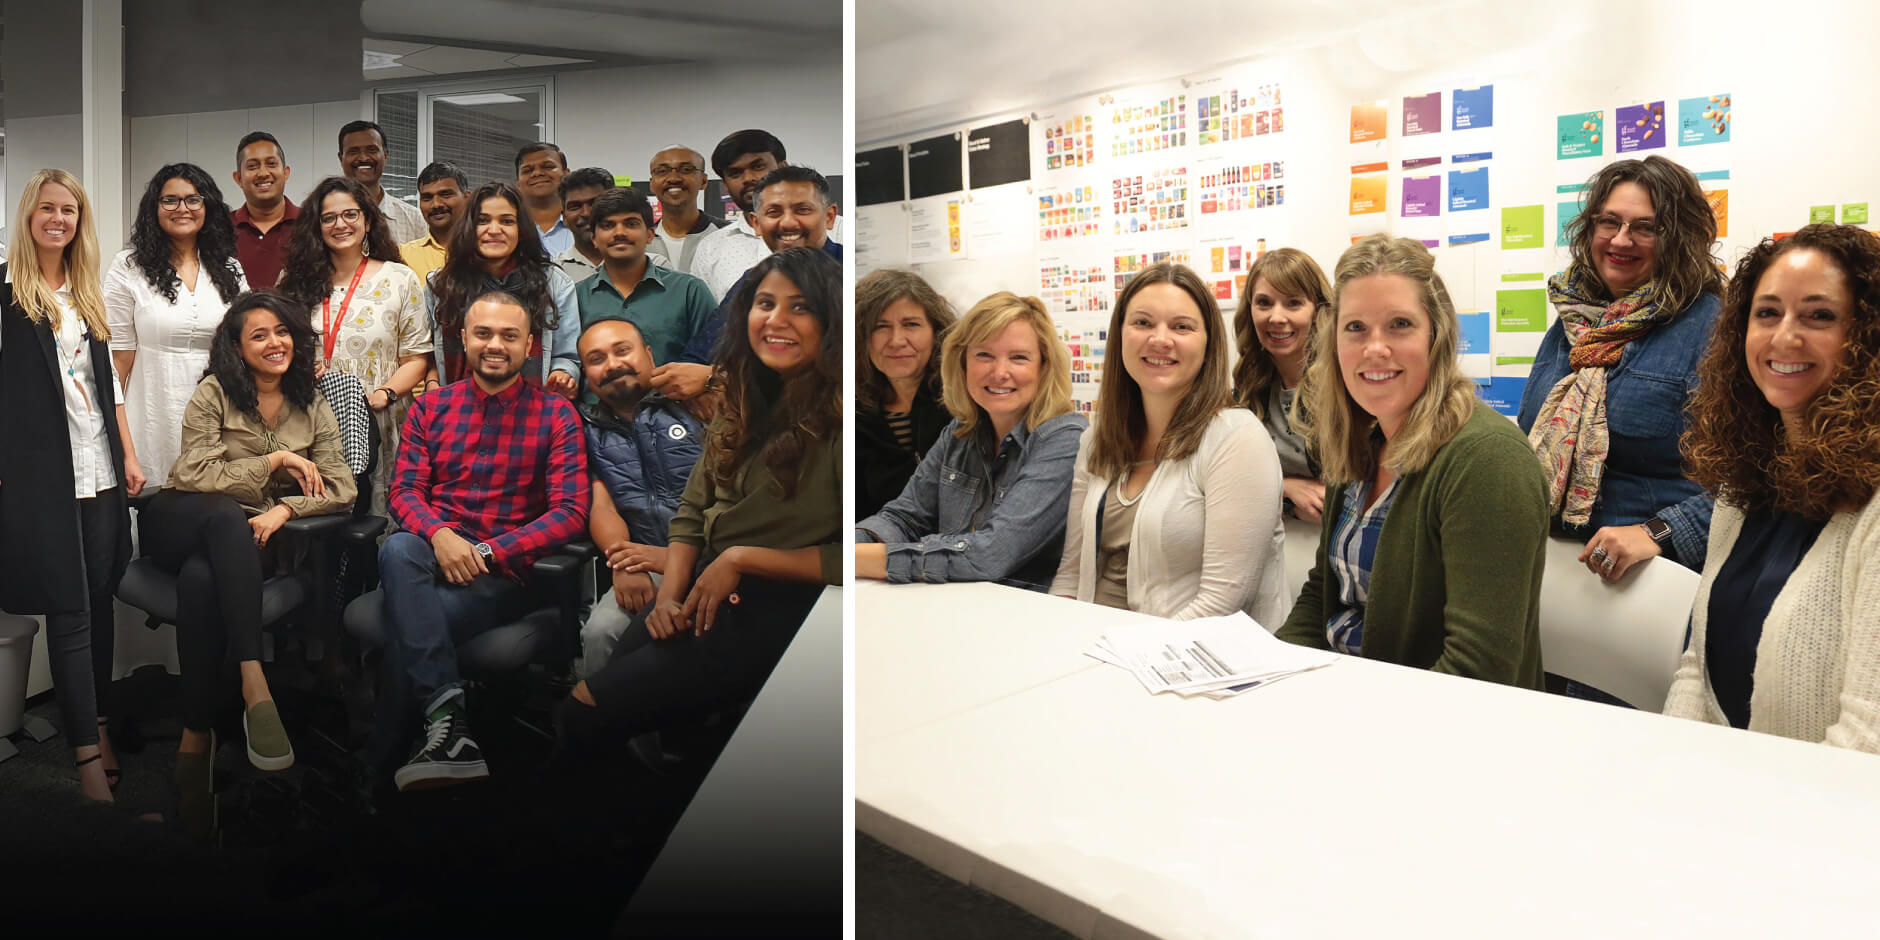 Members of our Brand Design Lab in Bangalore, India (left) and Minneapolis, Minnesota (right) developed the branding and packaging for Target’s food brand: Good & Gather.